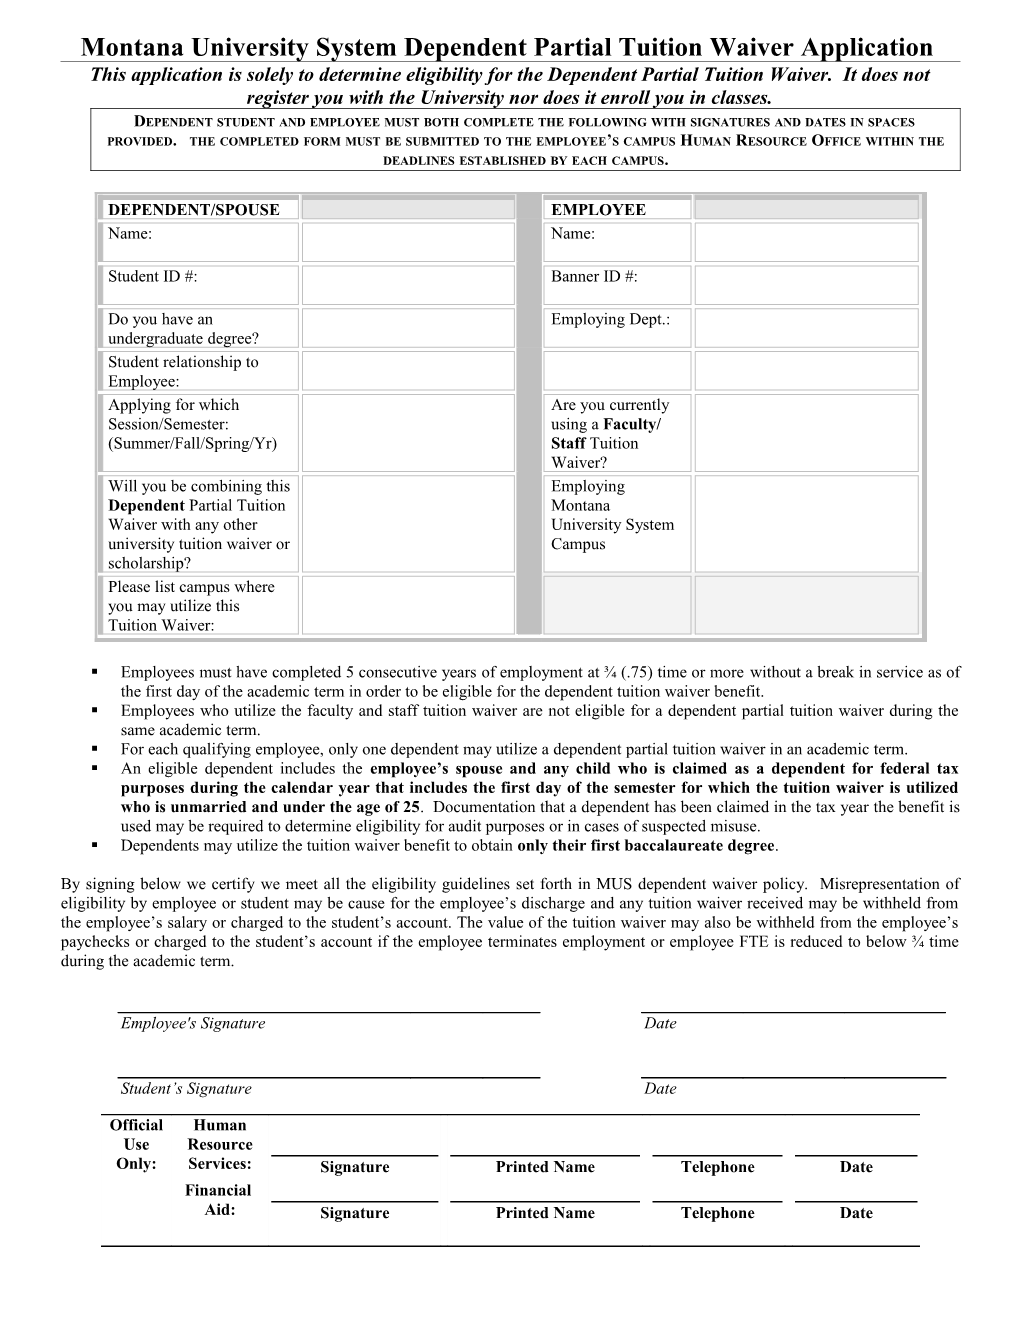 Montana University System Dependent Partial Tuition Waiver Application